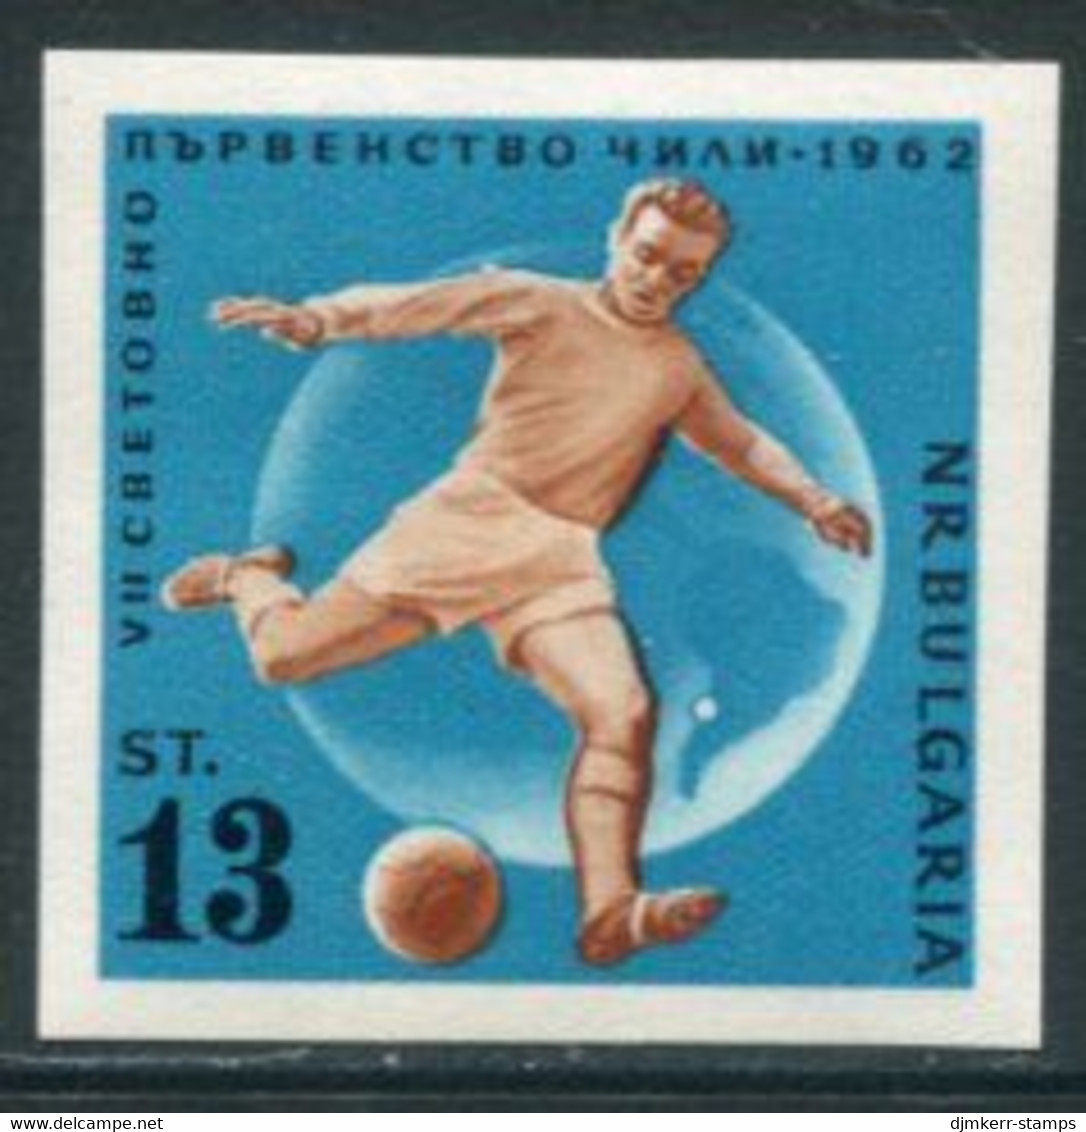 BULGARIA 1962 Football World Cup Imperforate  MNH / **.  Michel 1313 - Neufs